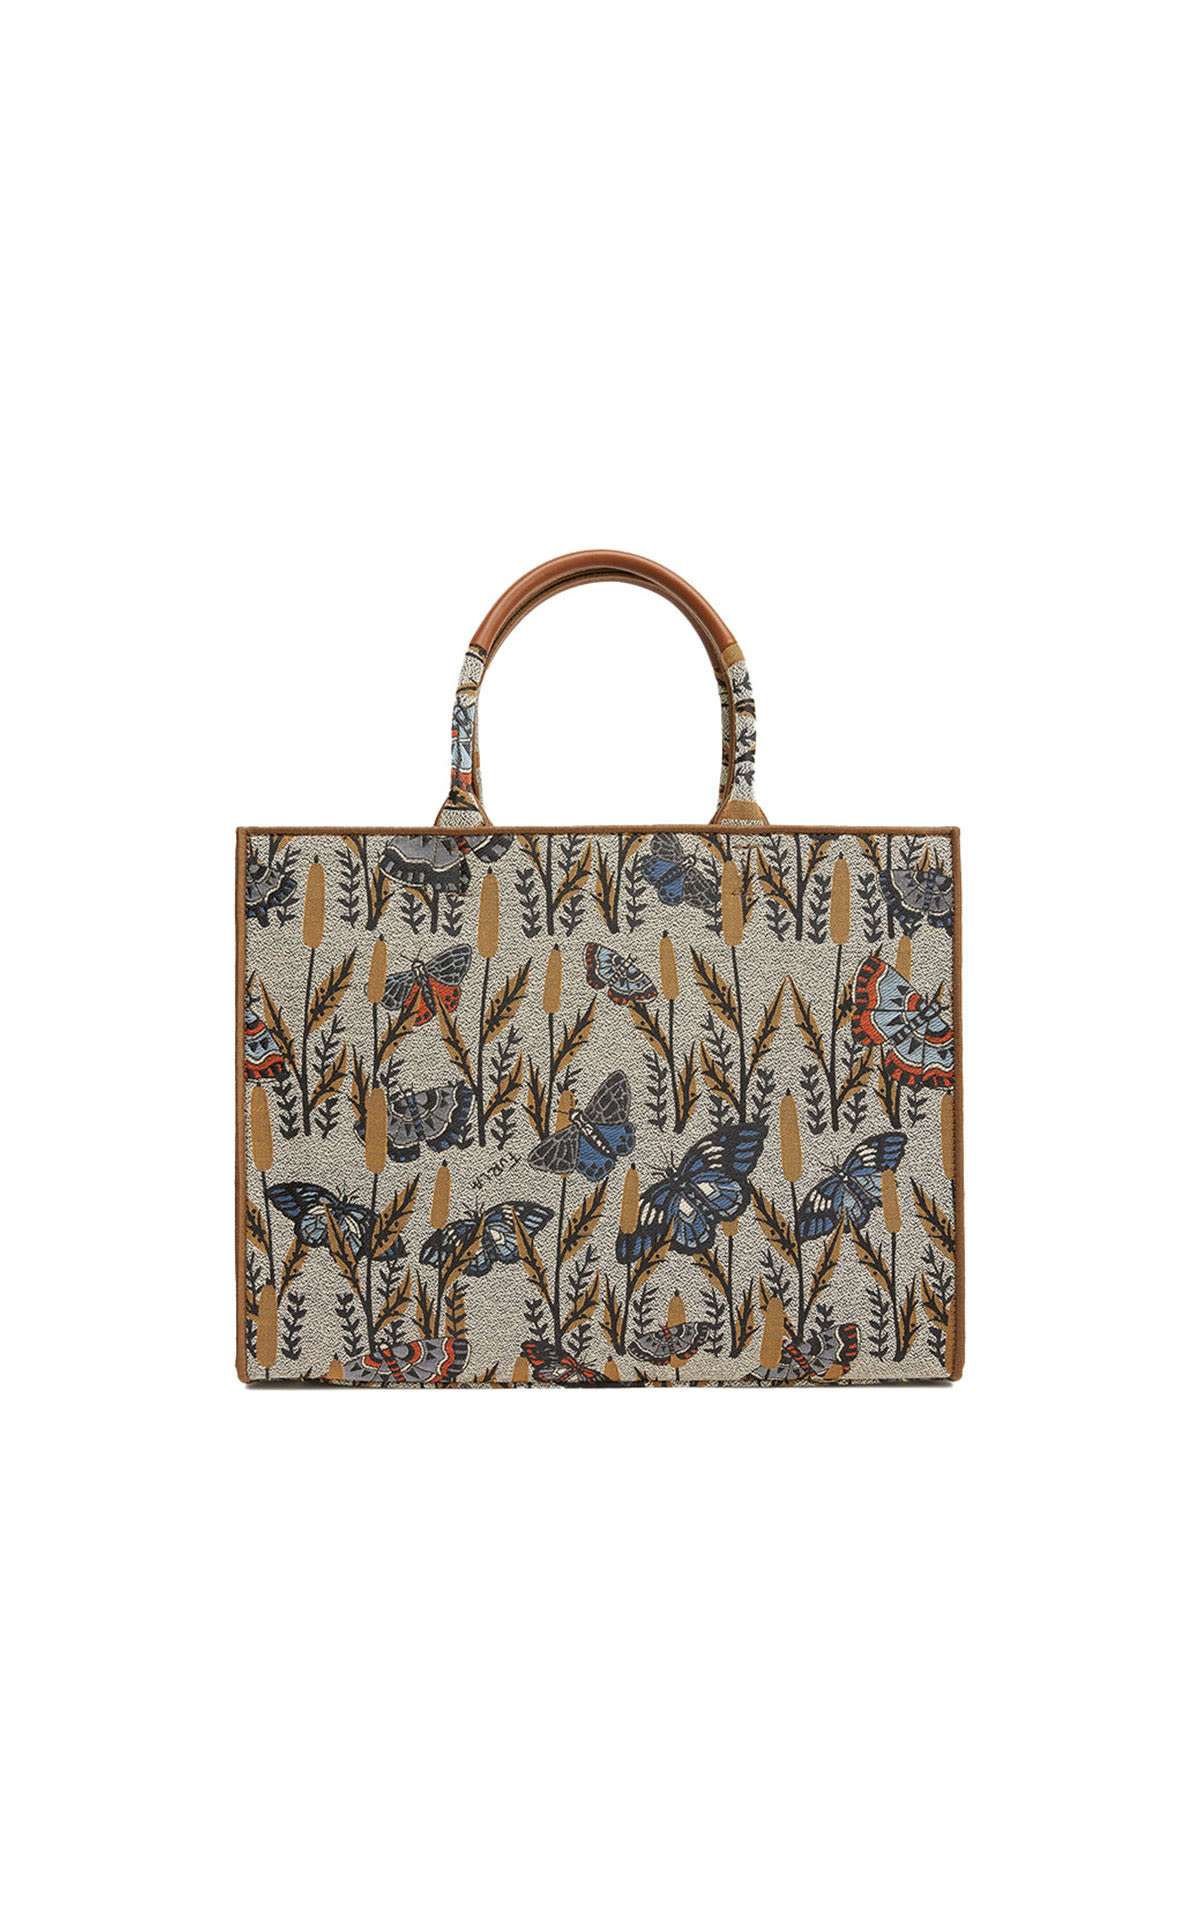 Furla Opportunity tote from Bicester Village